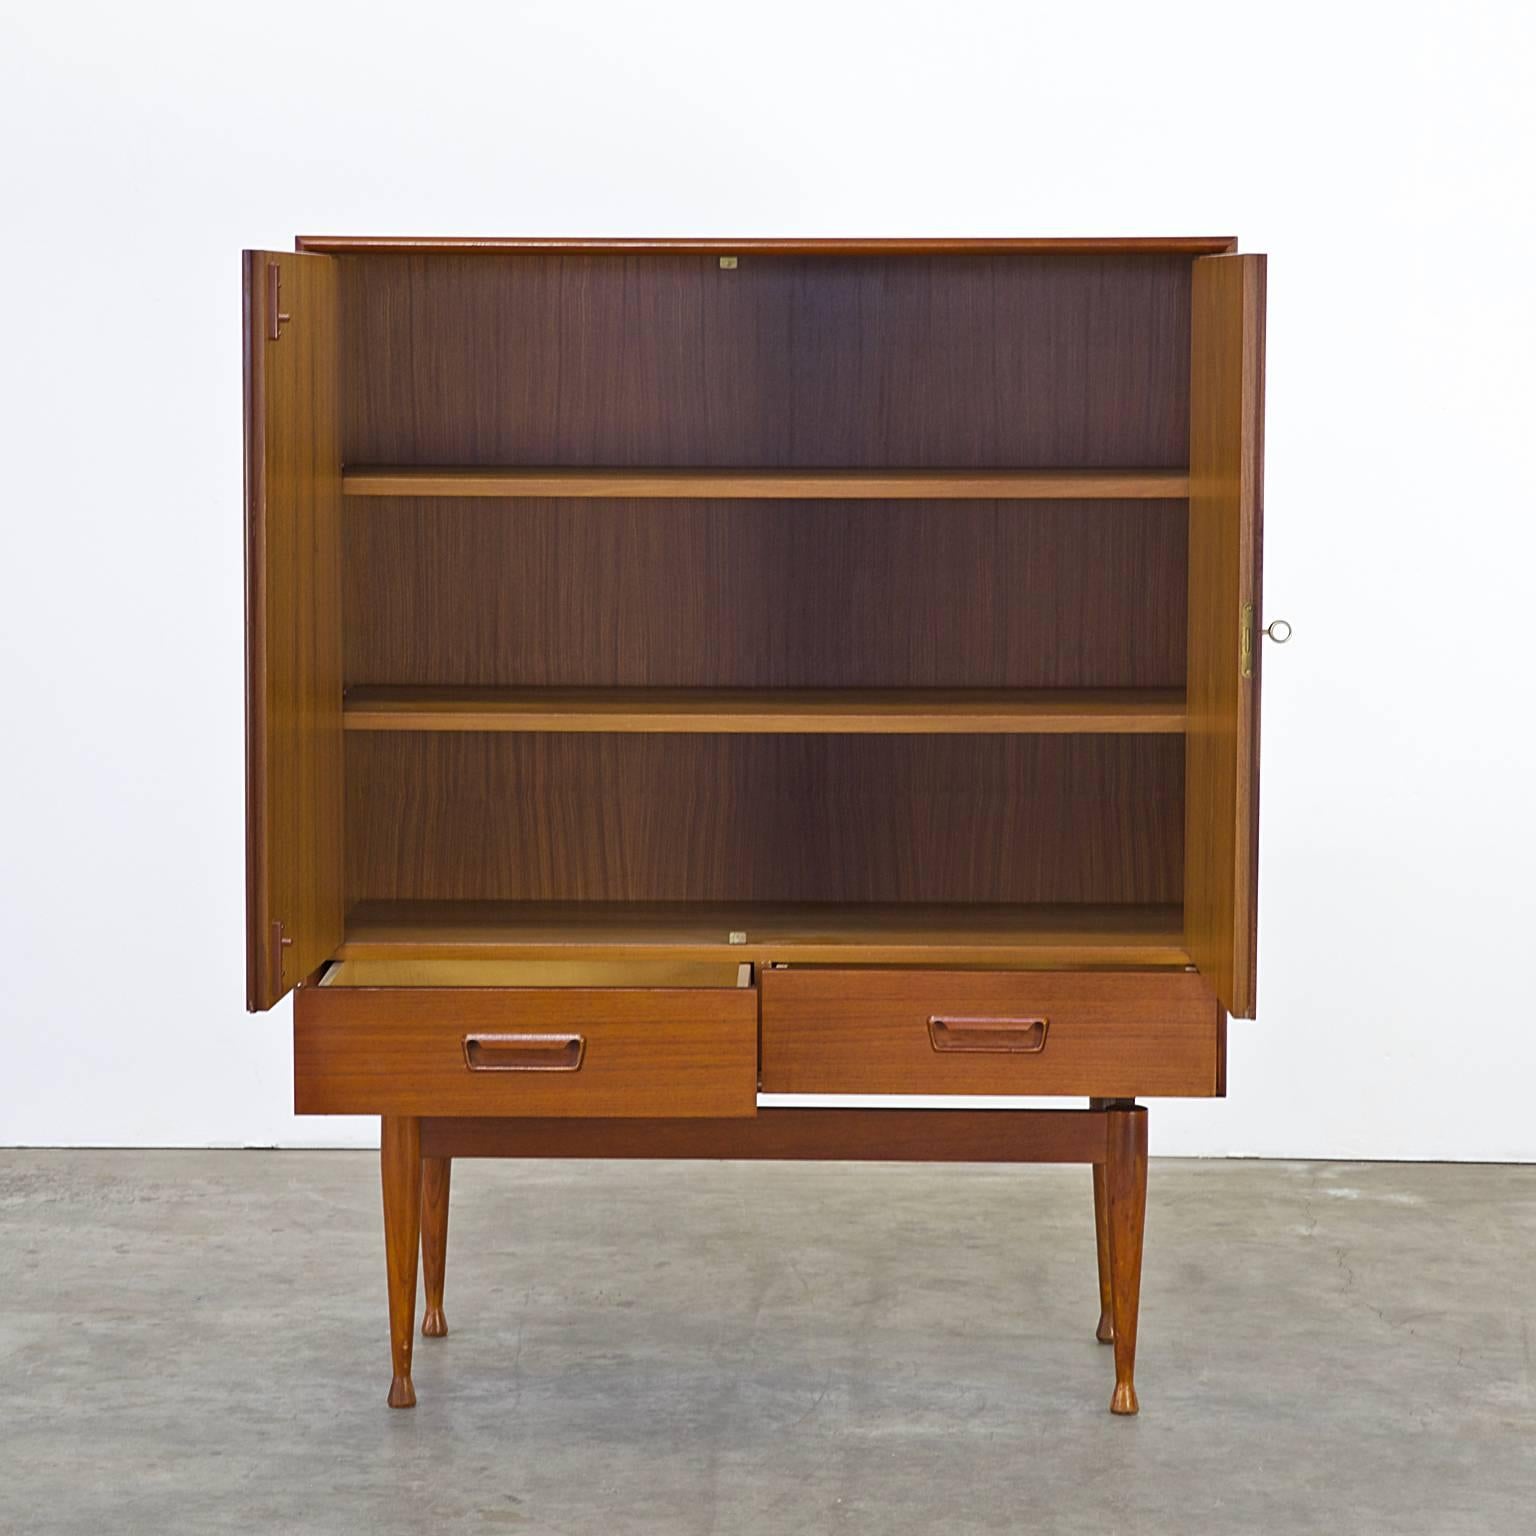 1960s teak cabinet two doors, two drawers attributed to Arne Wahl Iversen for Vinde Mobelfabrik, Denmark. Good condition, wear consistent age and use. Dimensions: 94,5cm (W) x 39cm (D) x 120cm (H).